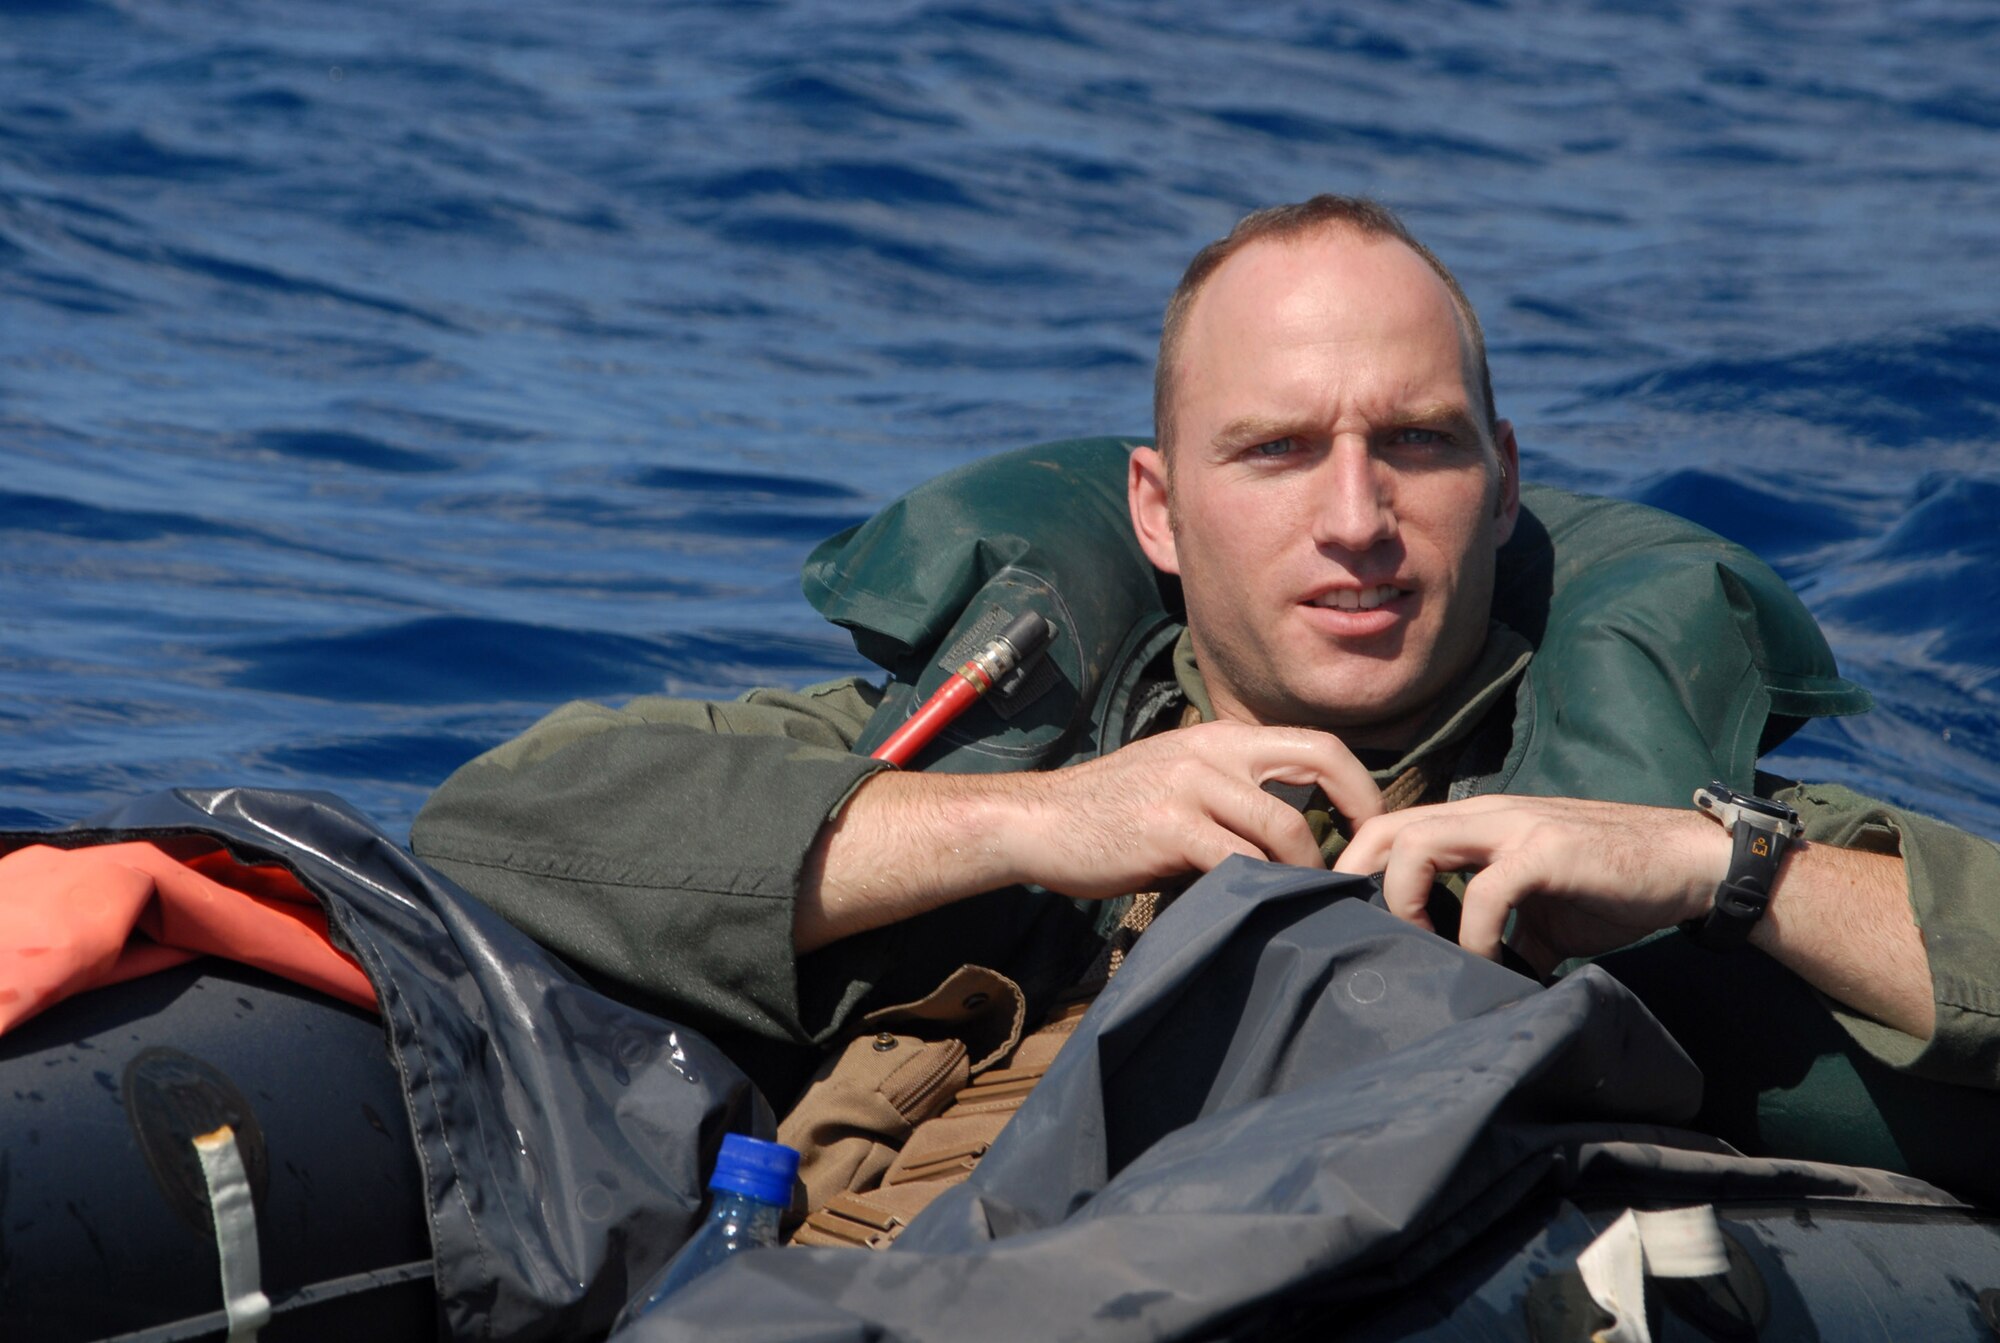 Capt. Derek Flynn, 67th Fighter Squadron, waits for rescue in the waters off the coast of Okinawa. Captain Flynn was placed in the water as part of a Survival Evasion Resistance Escape exercise at Kadena Air Base, Okinawa, Oct. 24, 2007, during Local Operational Readiness Exercise Beverly High 08-1. (U.S. Air Force photo/Staff Sgt. Christopher Marasky) 